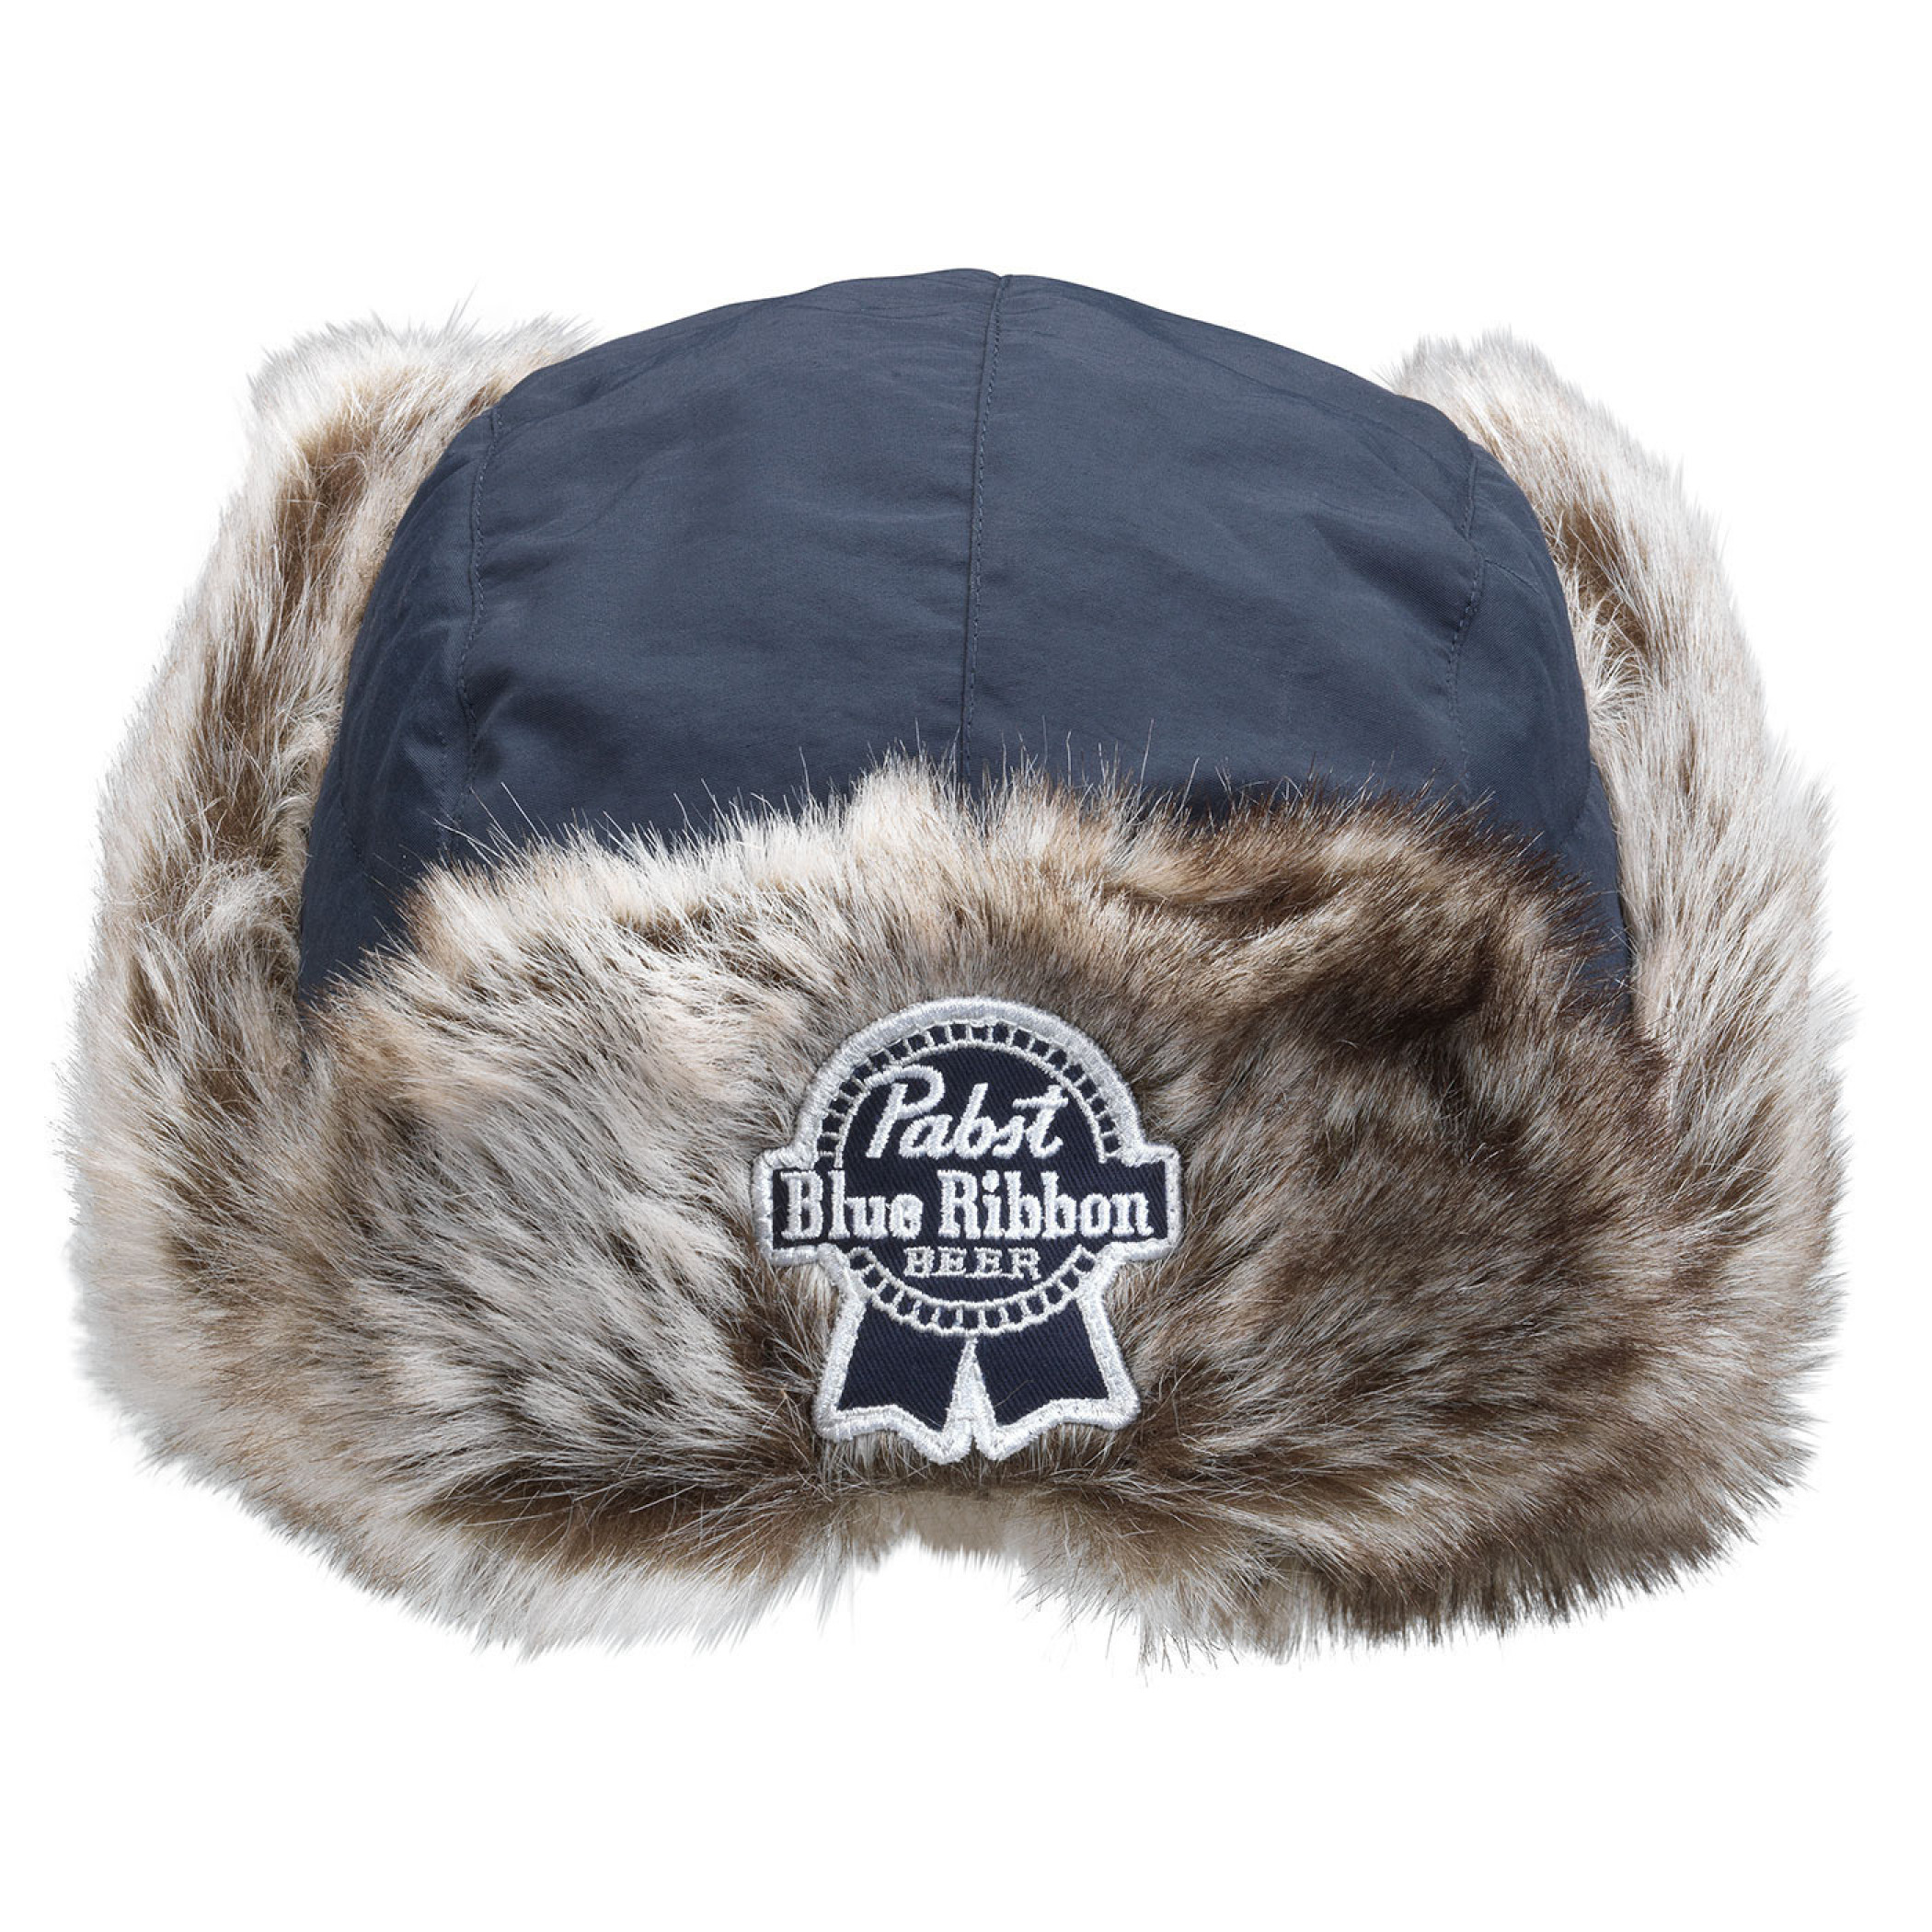 Pabst Blue Ribbon Beer Fur Lined Winter Hunting Hat